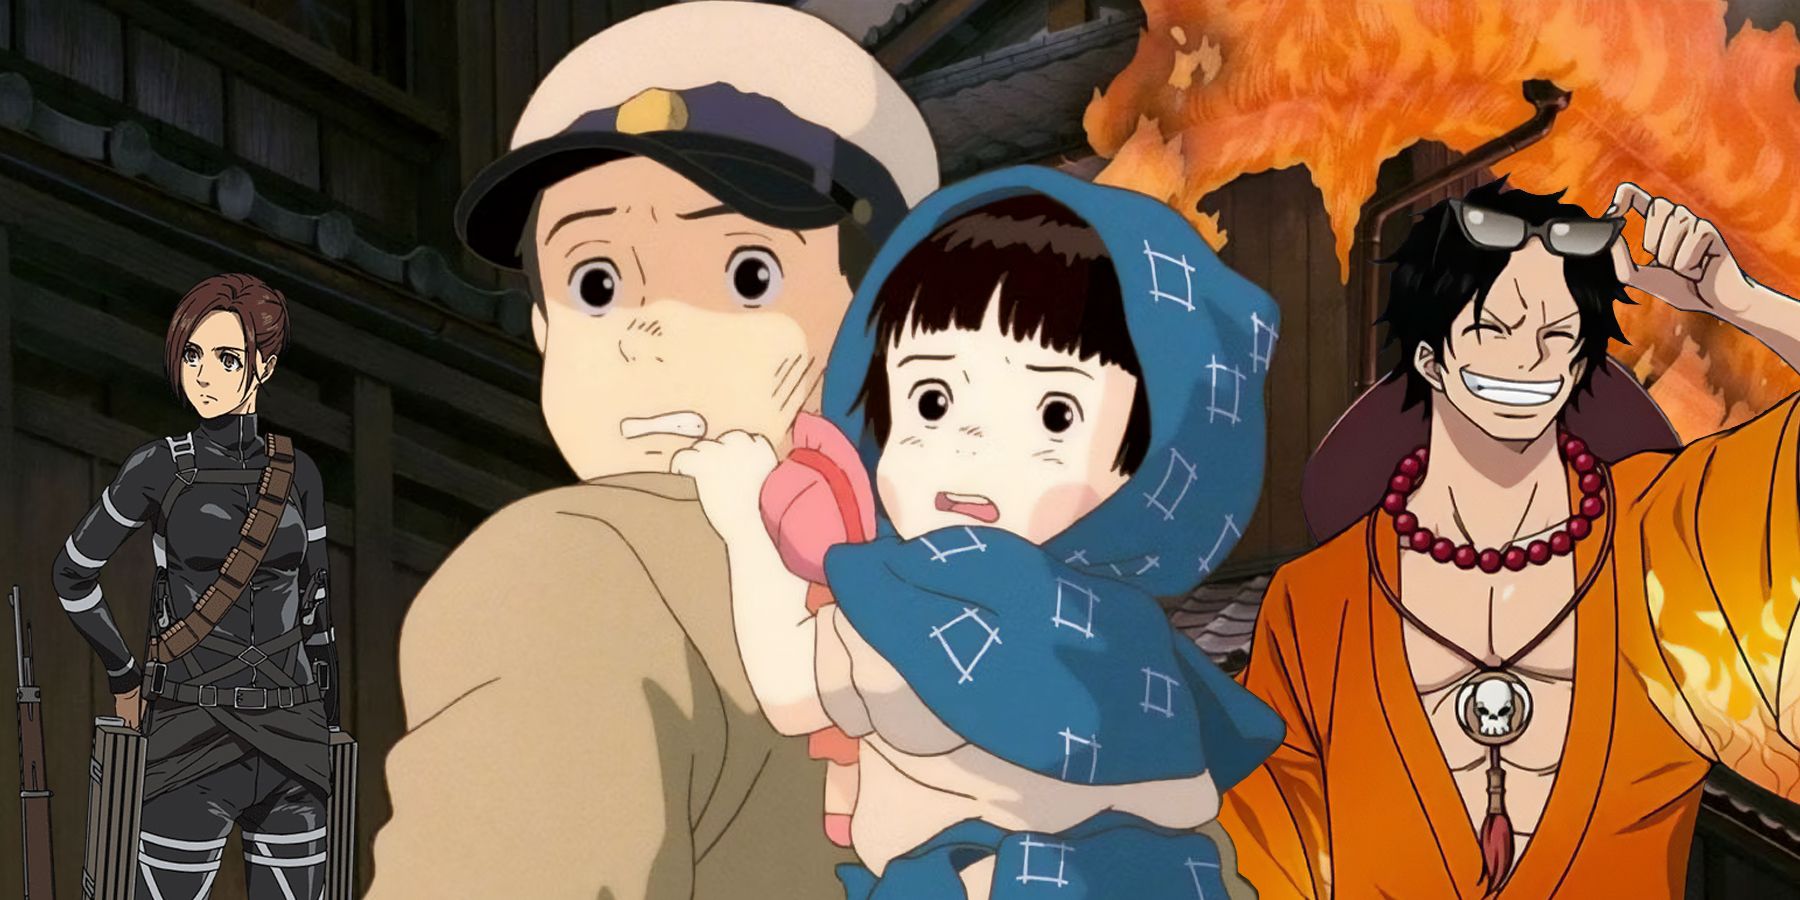 15-Saddest-Scenes-In-Anime-Of-All-Time